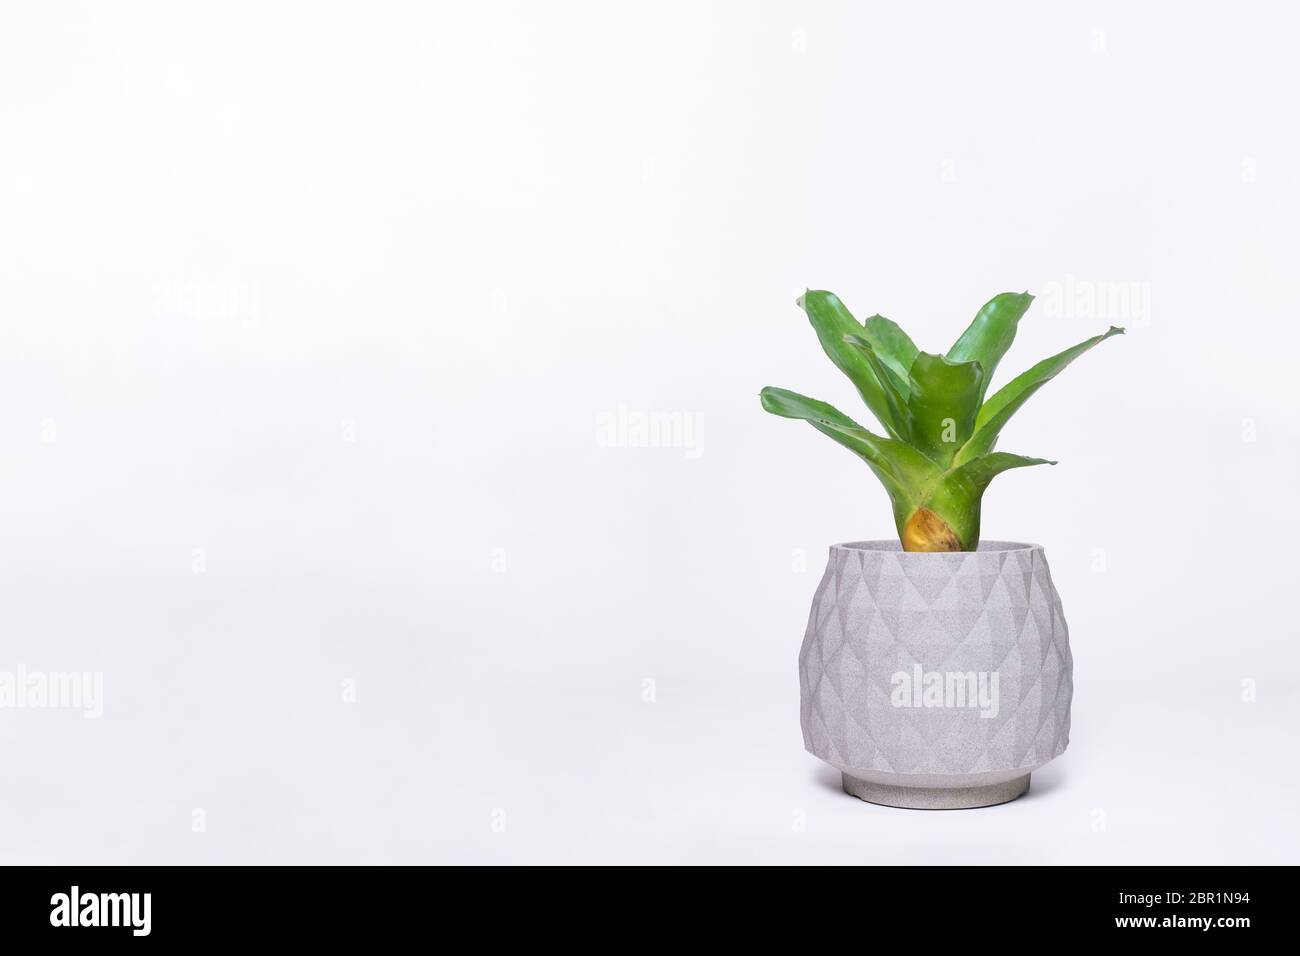 Green Bromeliad isolated on white background. Stock Photo